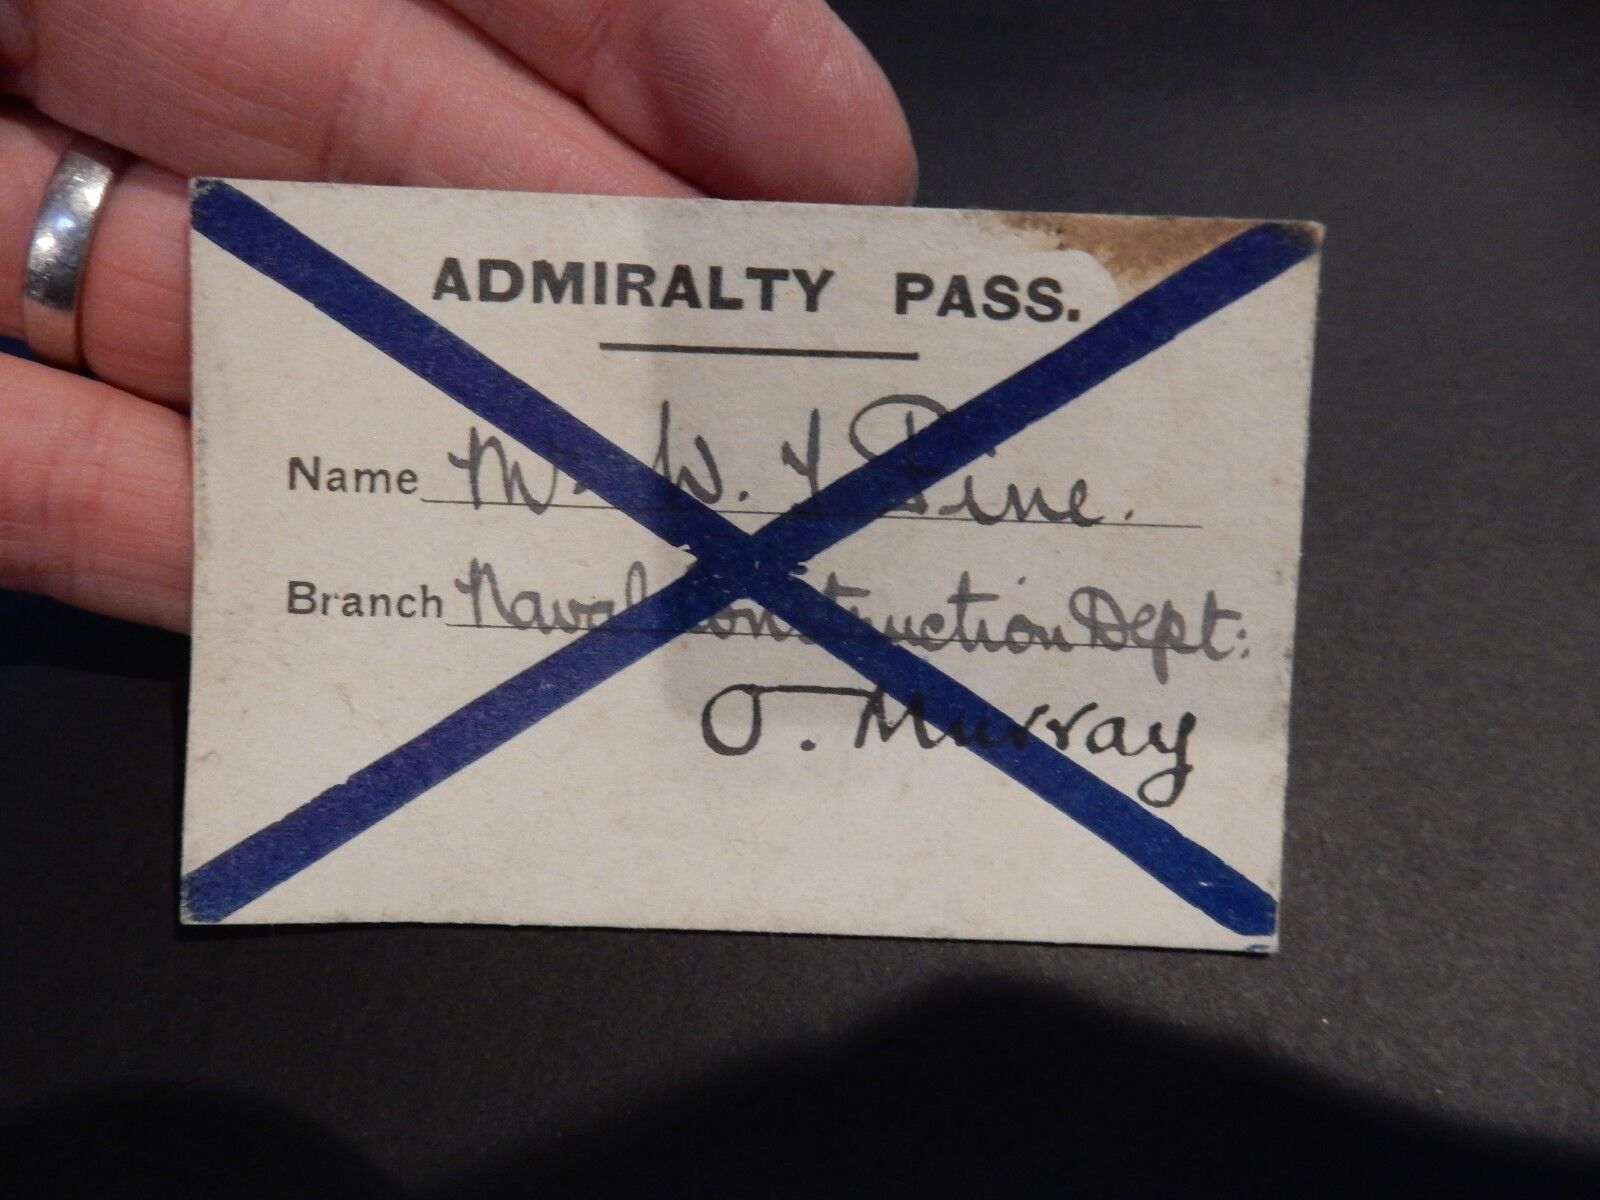 WW1 ADMIRALTY PASS OFFICIAL  IDEAL STAGE FILM PROP ETC STIFF CARD 80 X 55mm navy